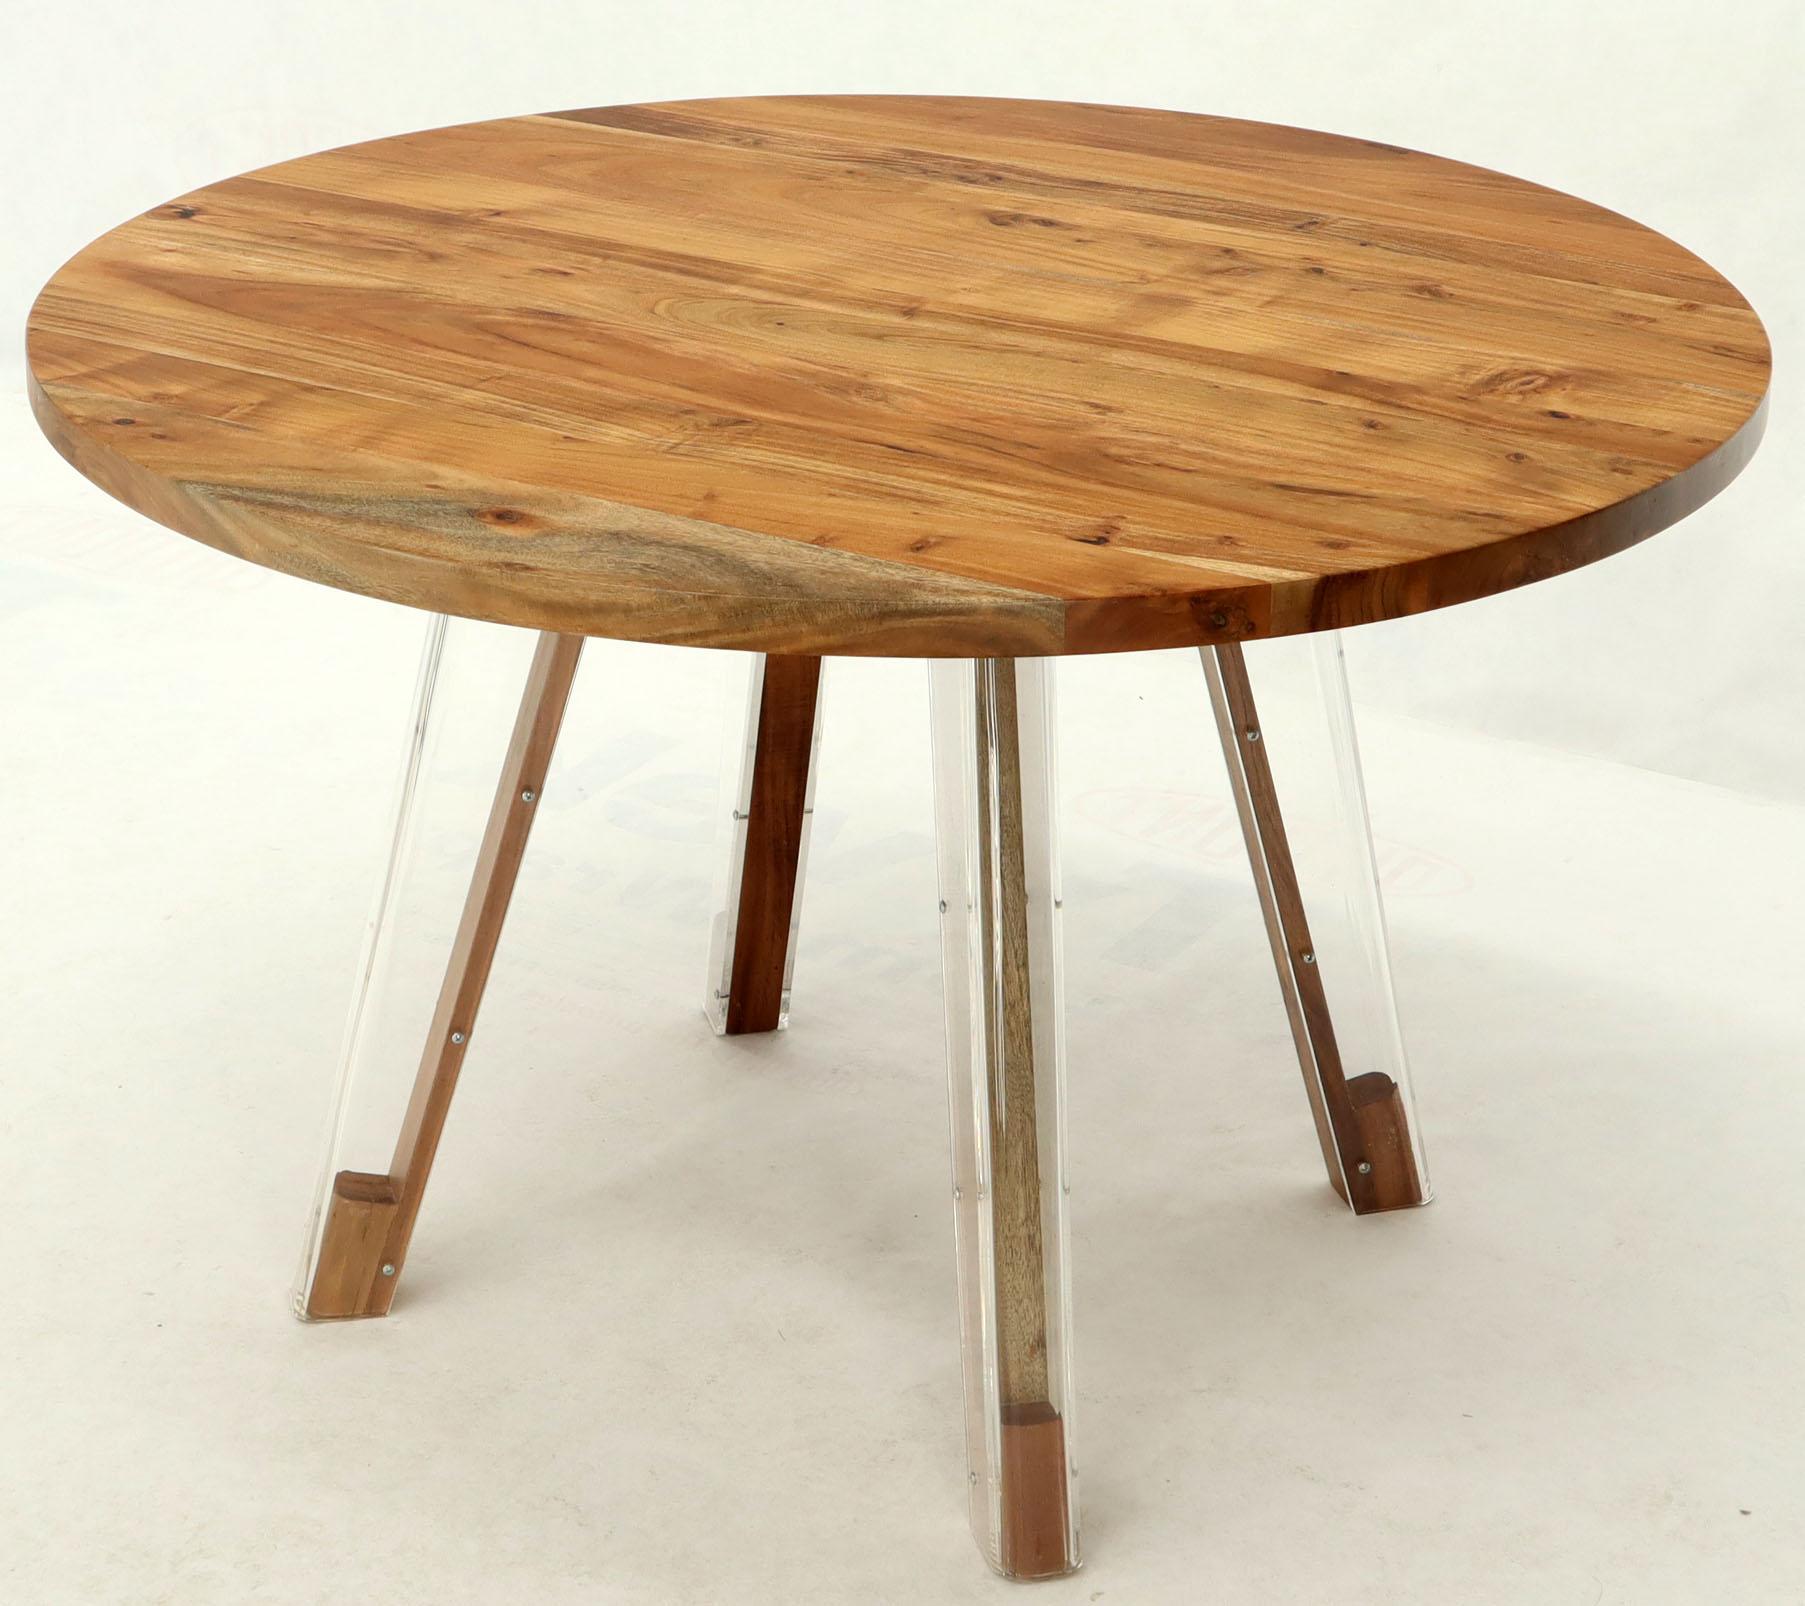 Round Solid Thick Oiled Teak Top Lucite Legs Dining Table In Excellent Condition For Sale In Rockaway, NJ